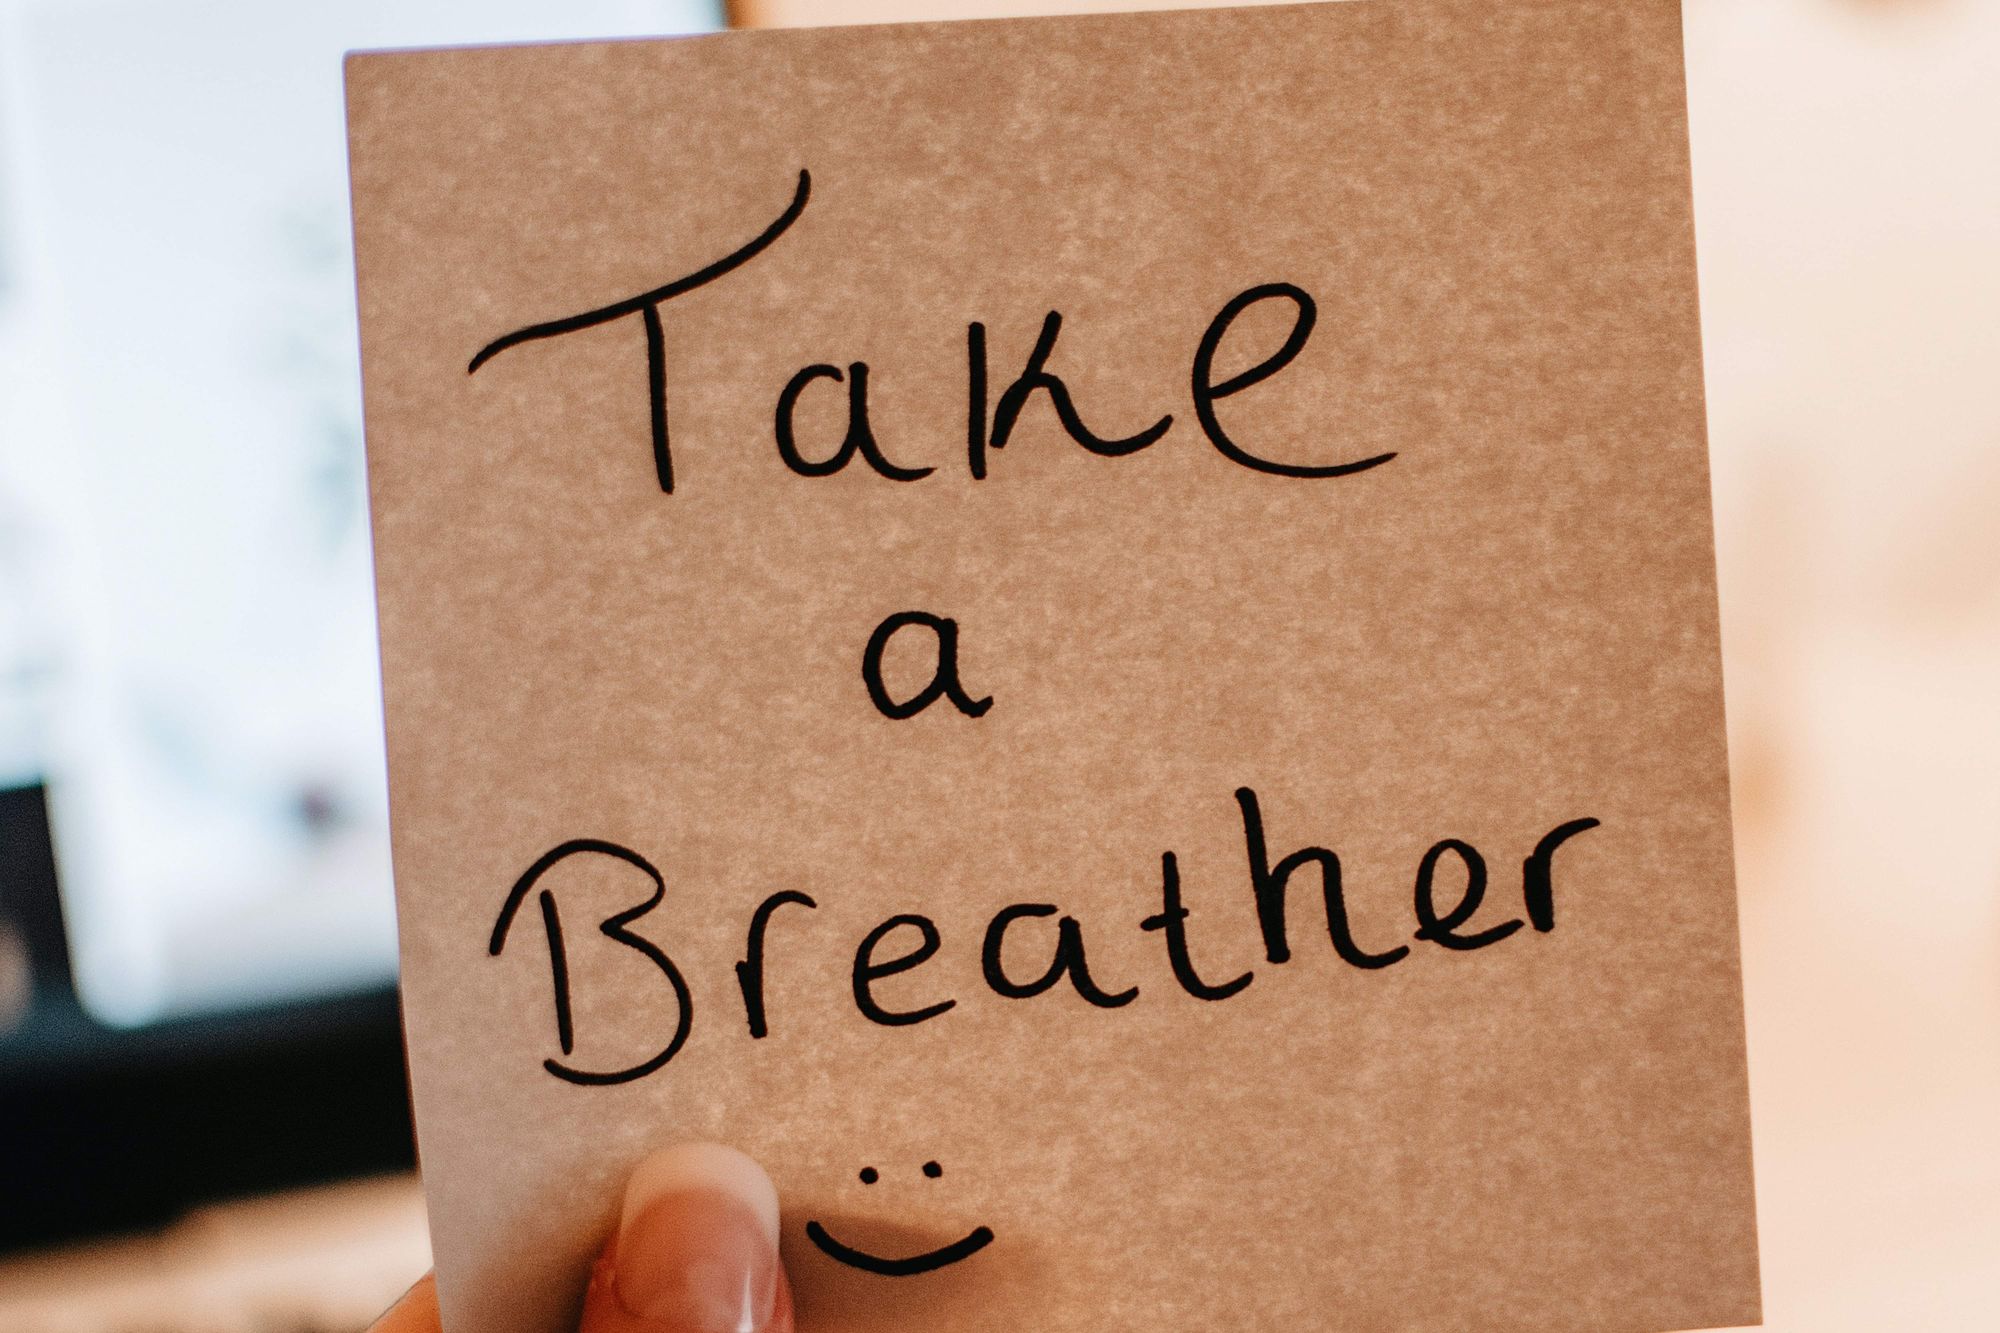 Image of a woman holding a paper with text "Take a breather"